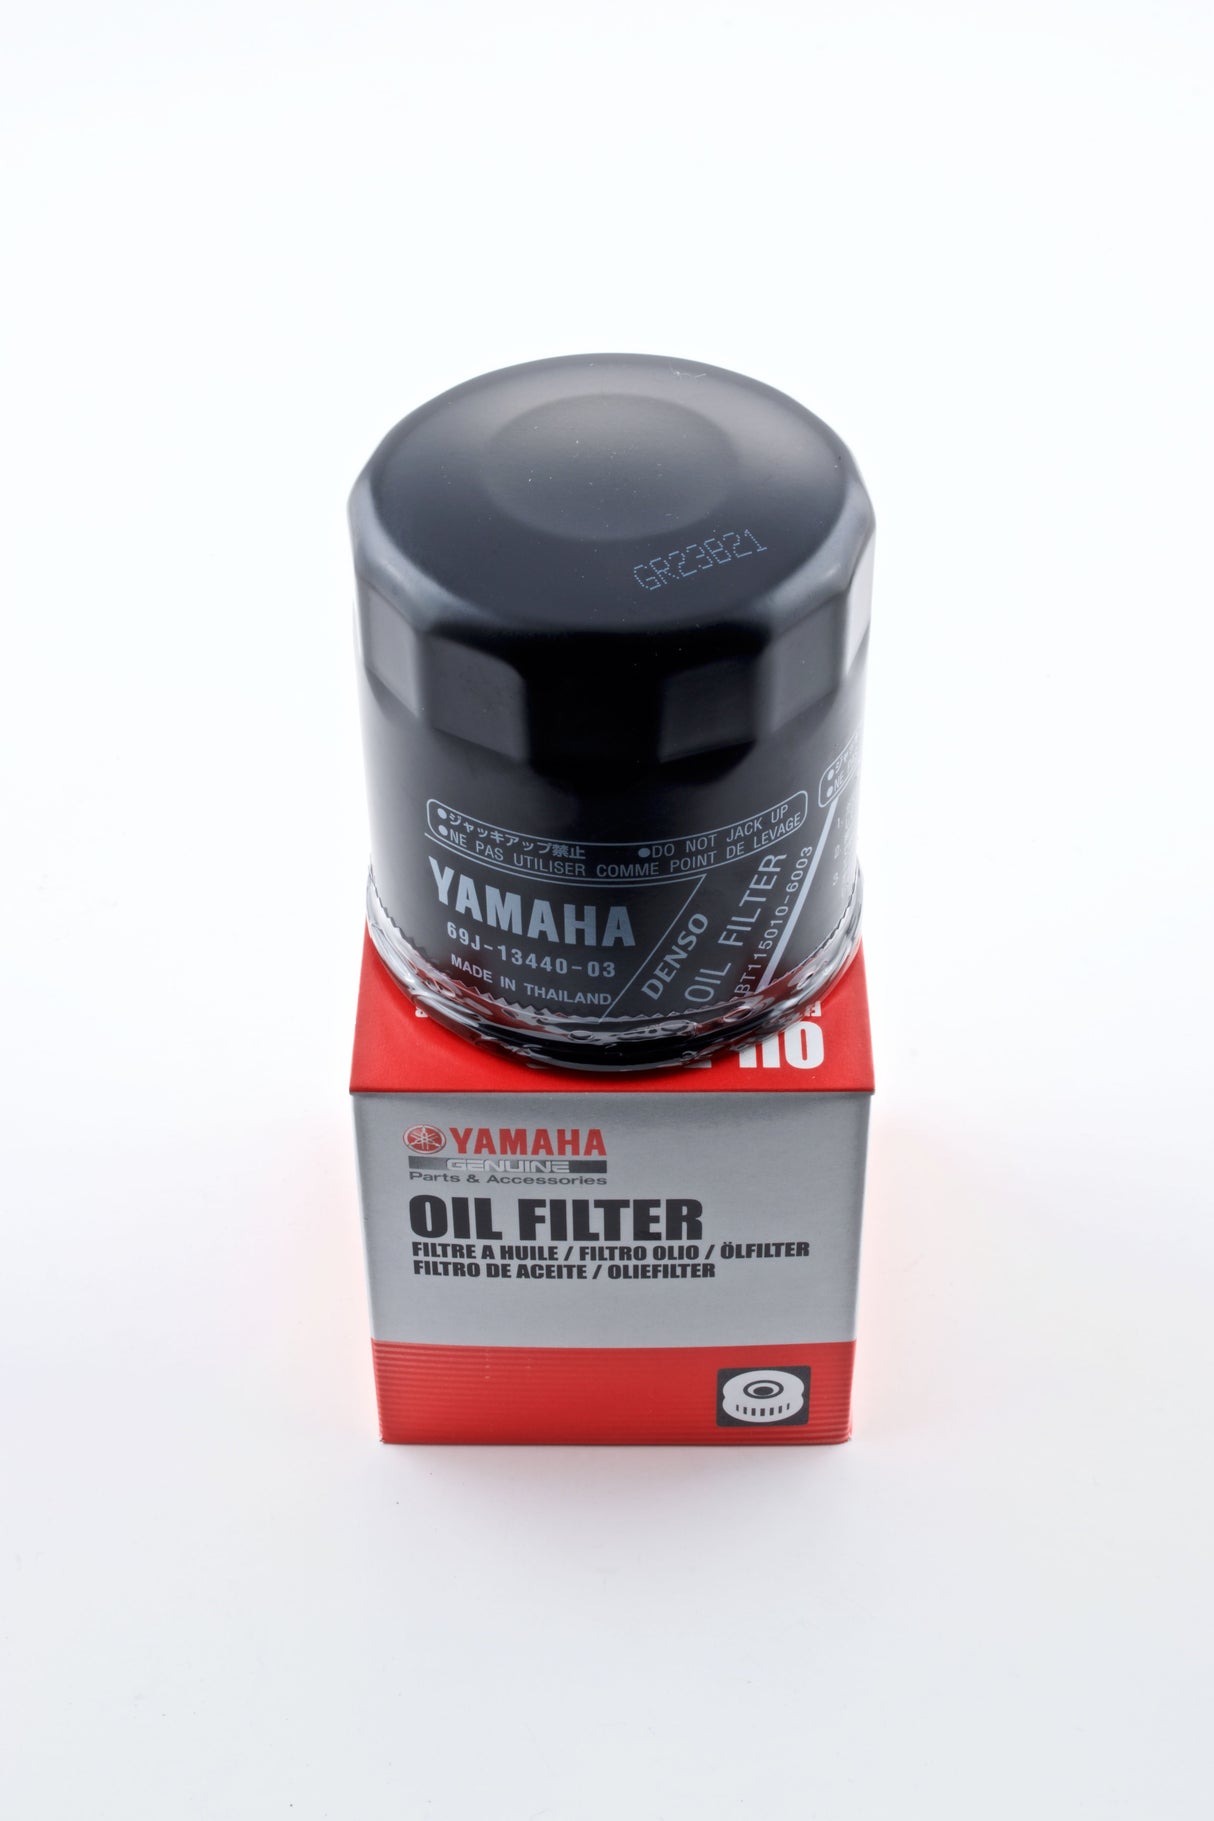 Yamaha F150 F200 F225 F250 Outboard Oil Filter 69J-13440-03-00 Supersedes to 69J-13440-04-00